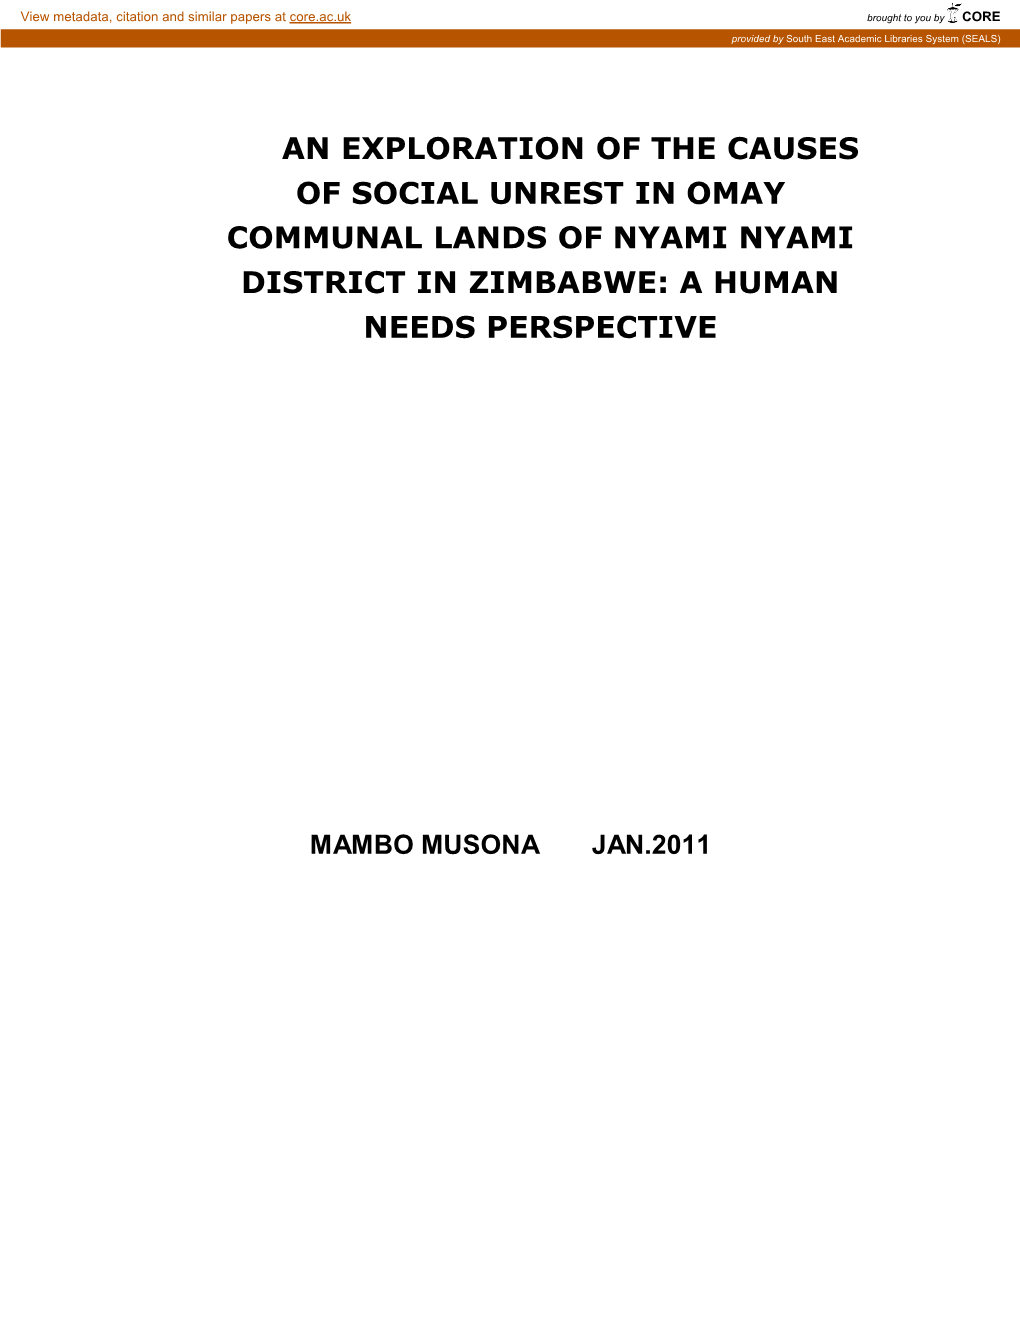 An Exploration of the Causes of Social Unrest in Omay Communal Lands of Nyami Nyami District in Zimbabwe: a Human Needs Perspective